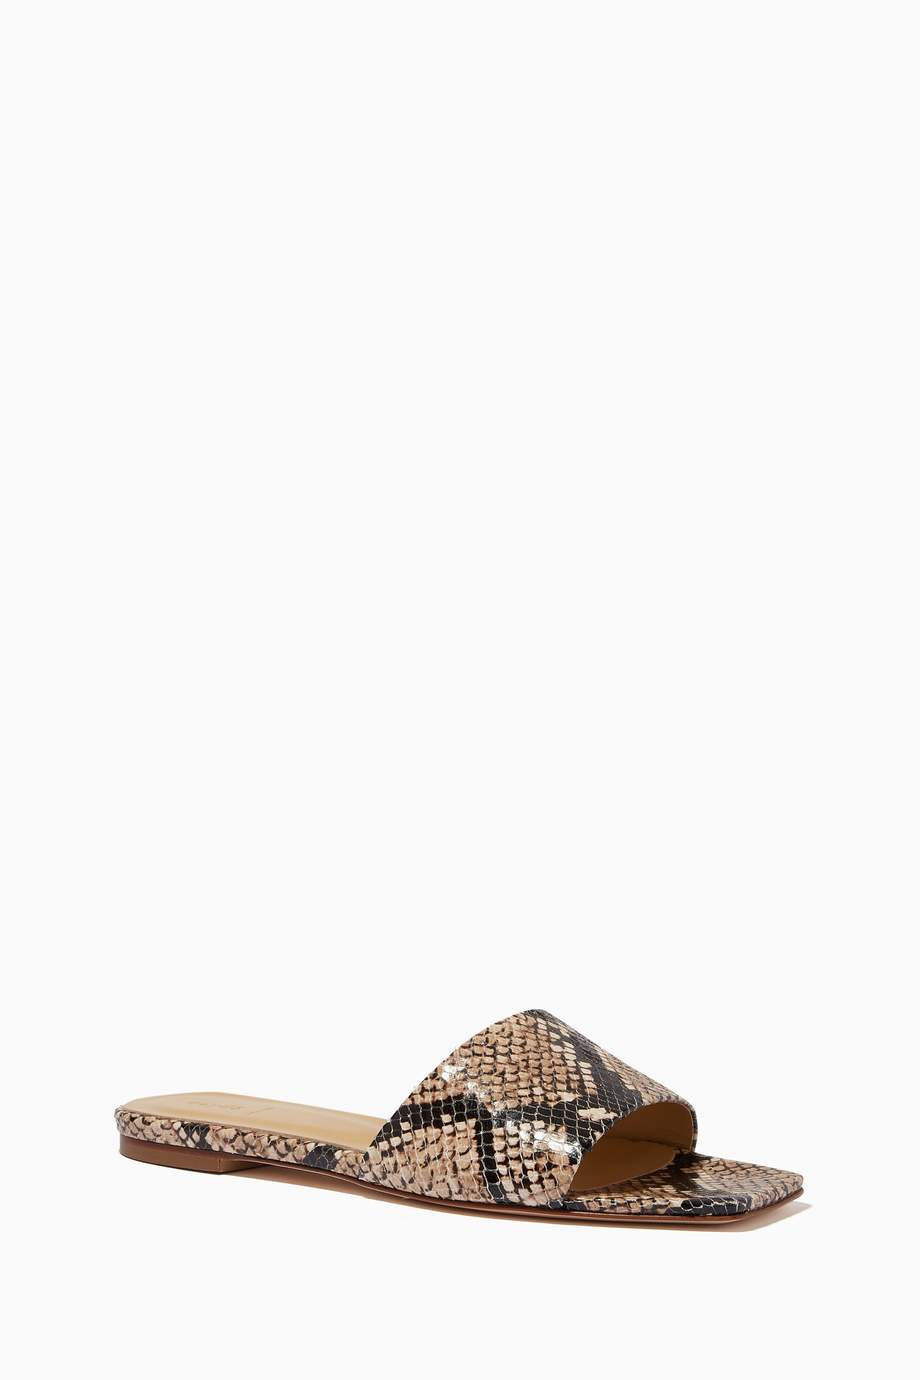 Shop Aeyde Neutral Anna Flat Sandals in Python Print Calf Leather for ...